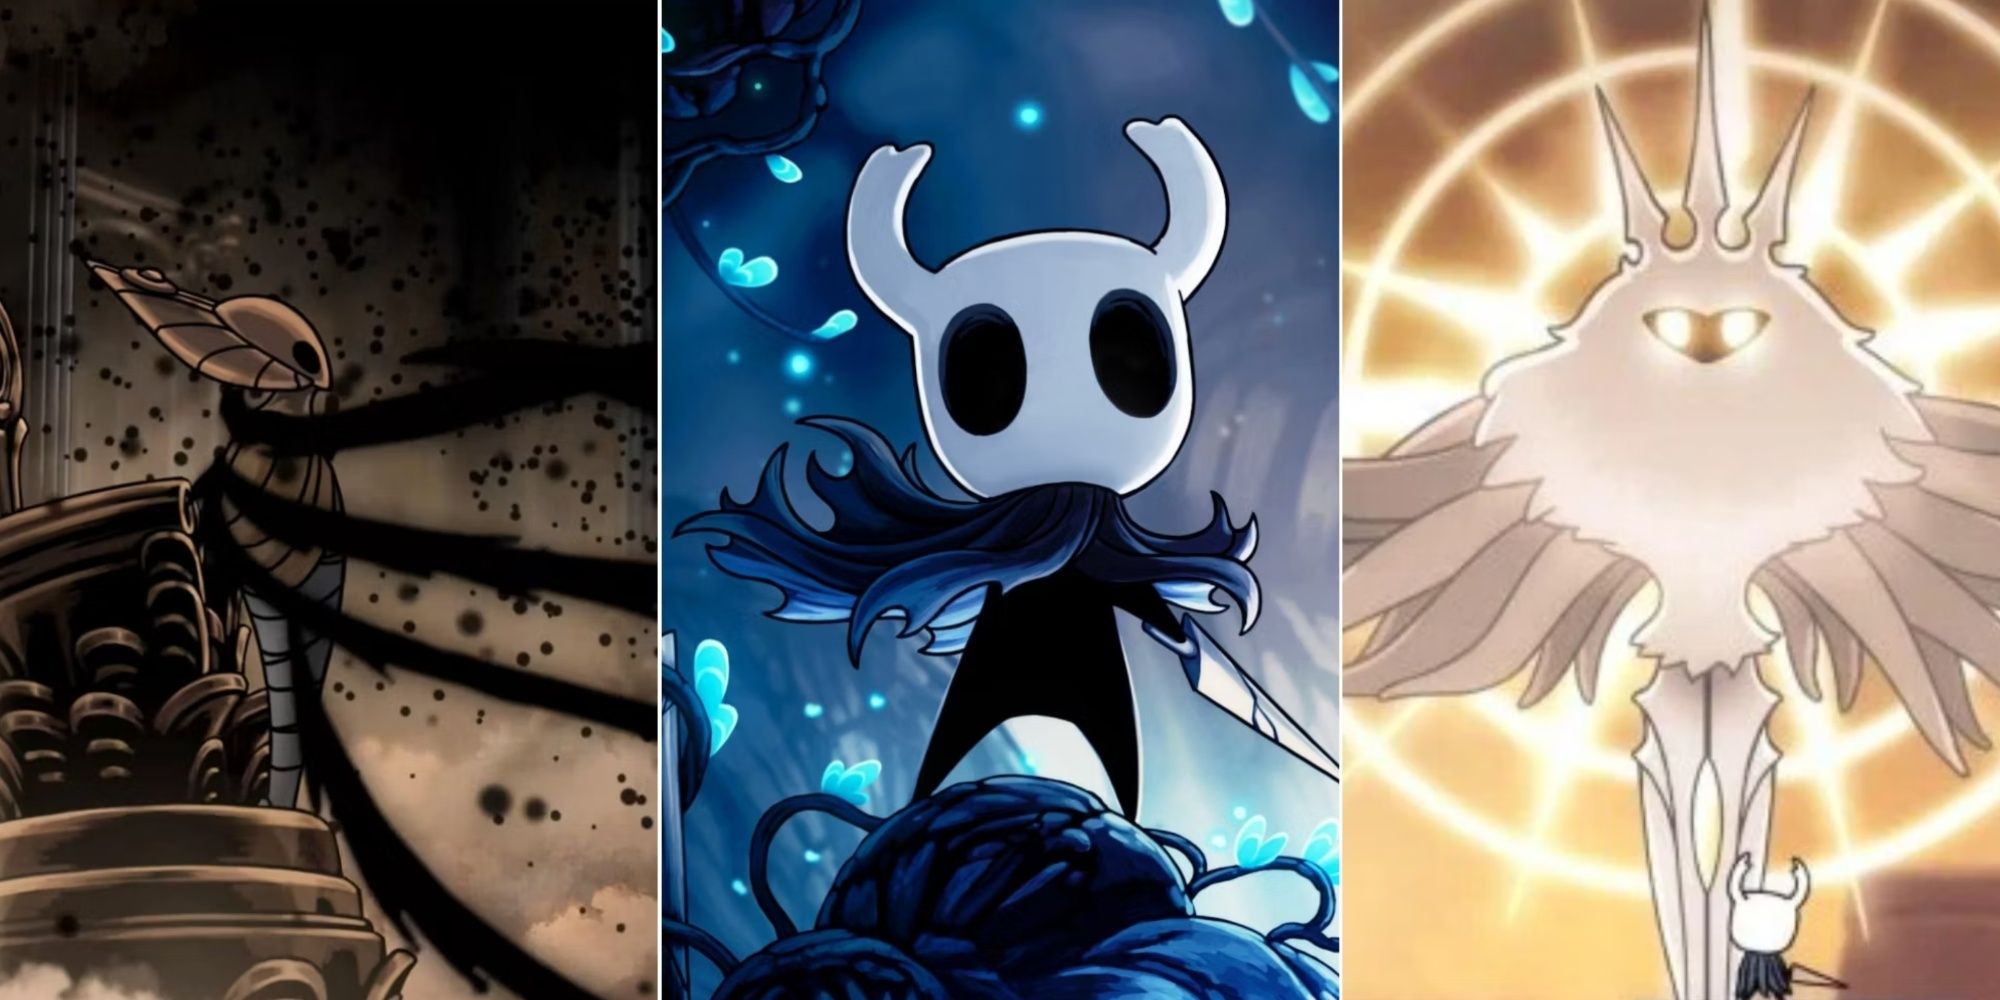 Split images of the Godseeker being consumed by the Void, a close-up of the Knight, and the Knight in front of the Radiance in Hollow Knight